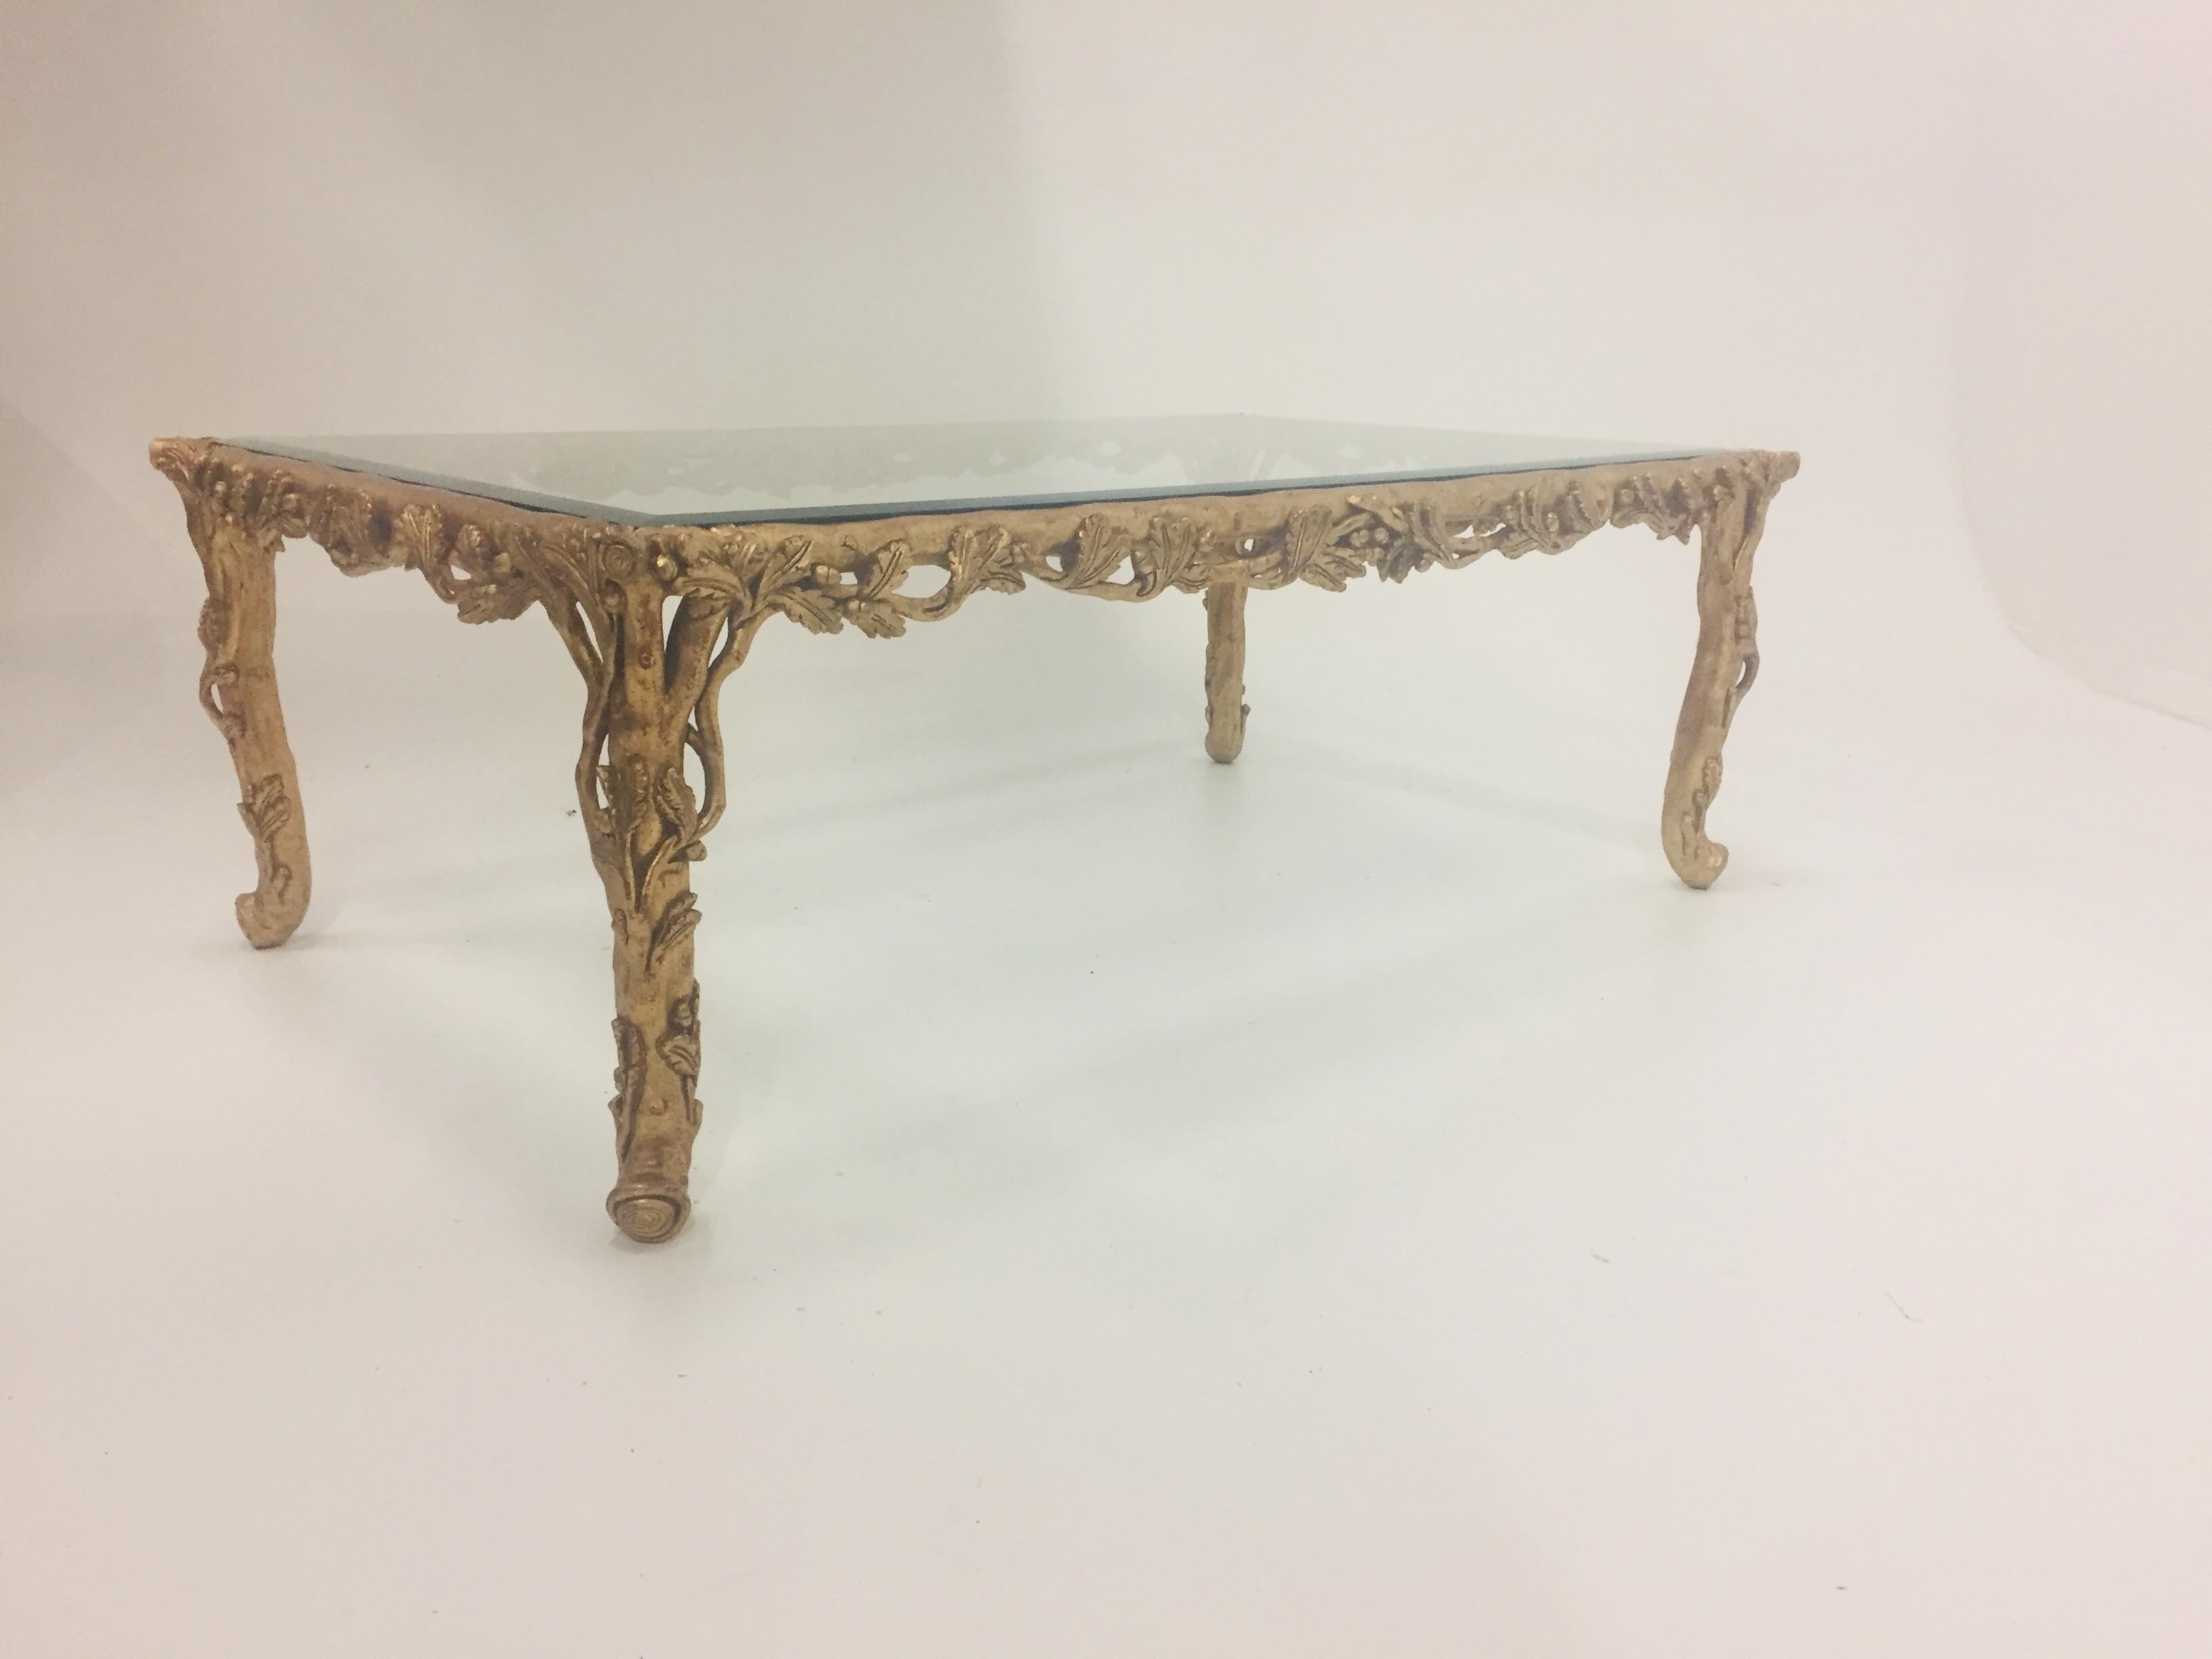 Very glamorous gilded hand carved wood rectangular coffee table having ornate leafy decoration on the base and heavy bevelled glass top.
 